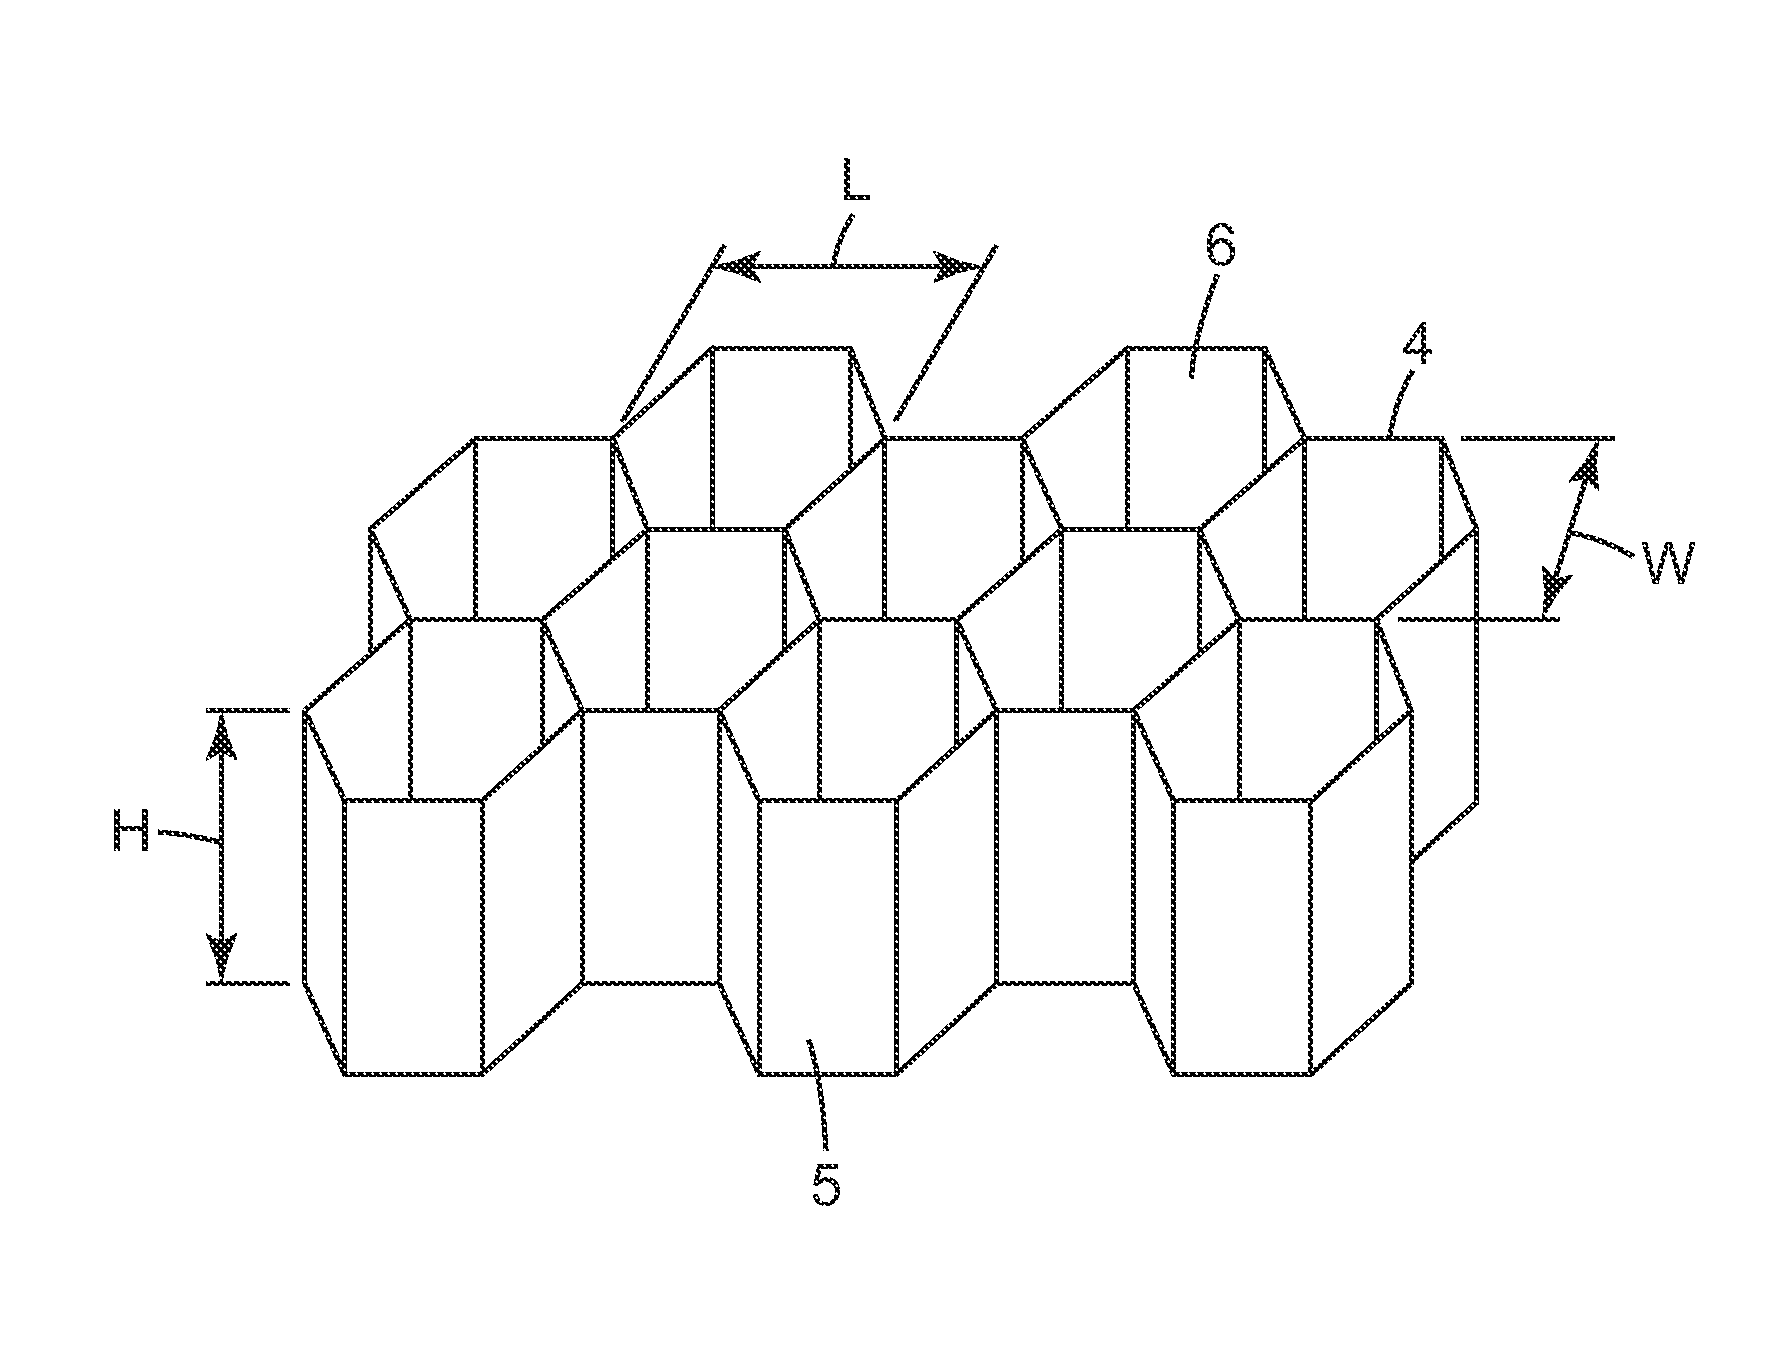 Epoxy resin-based composition as a filler honeycomb cells